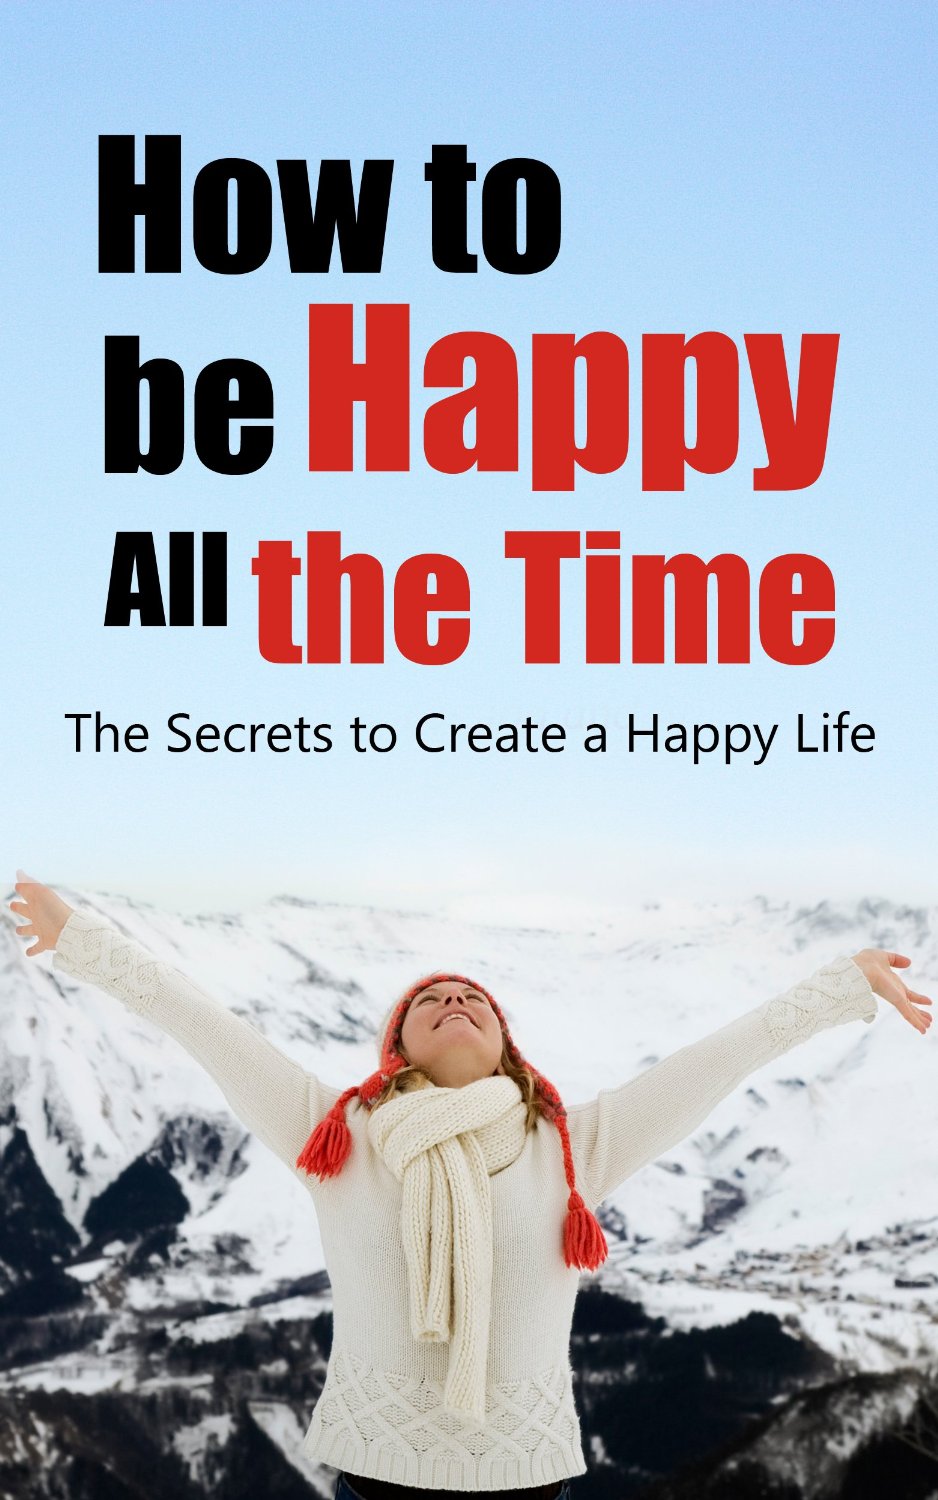 How to be Happy All the Time – The Secrets to Create a Happy Life